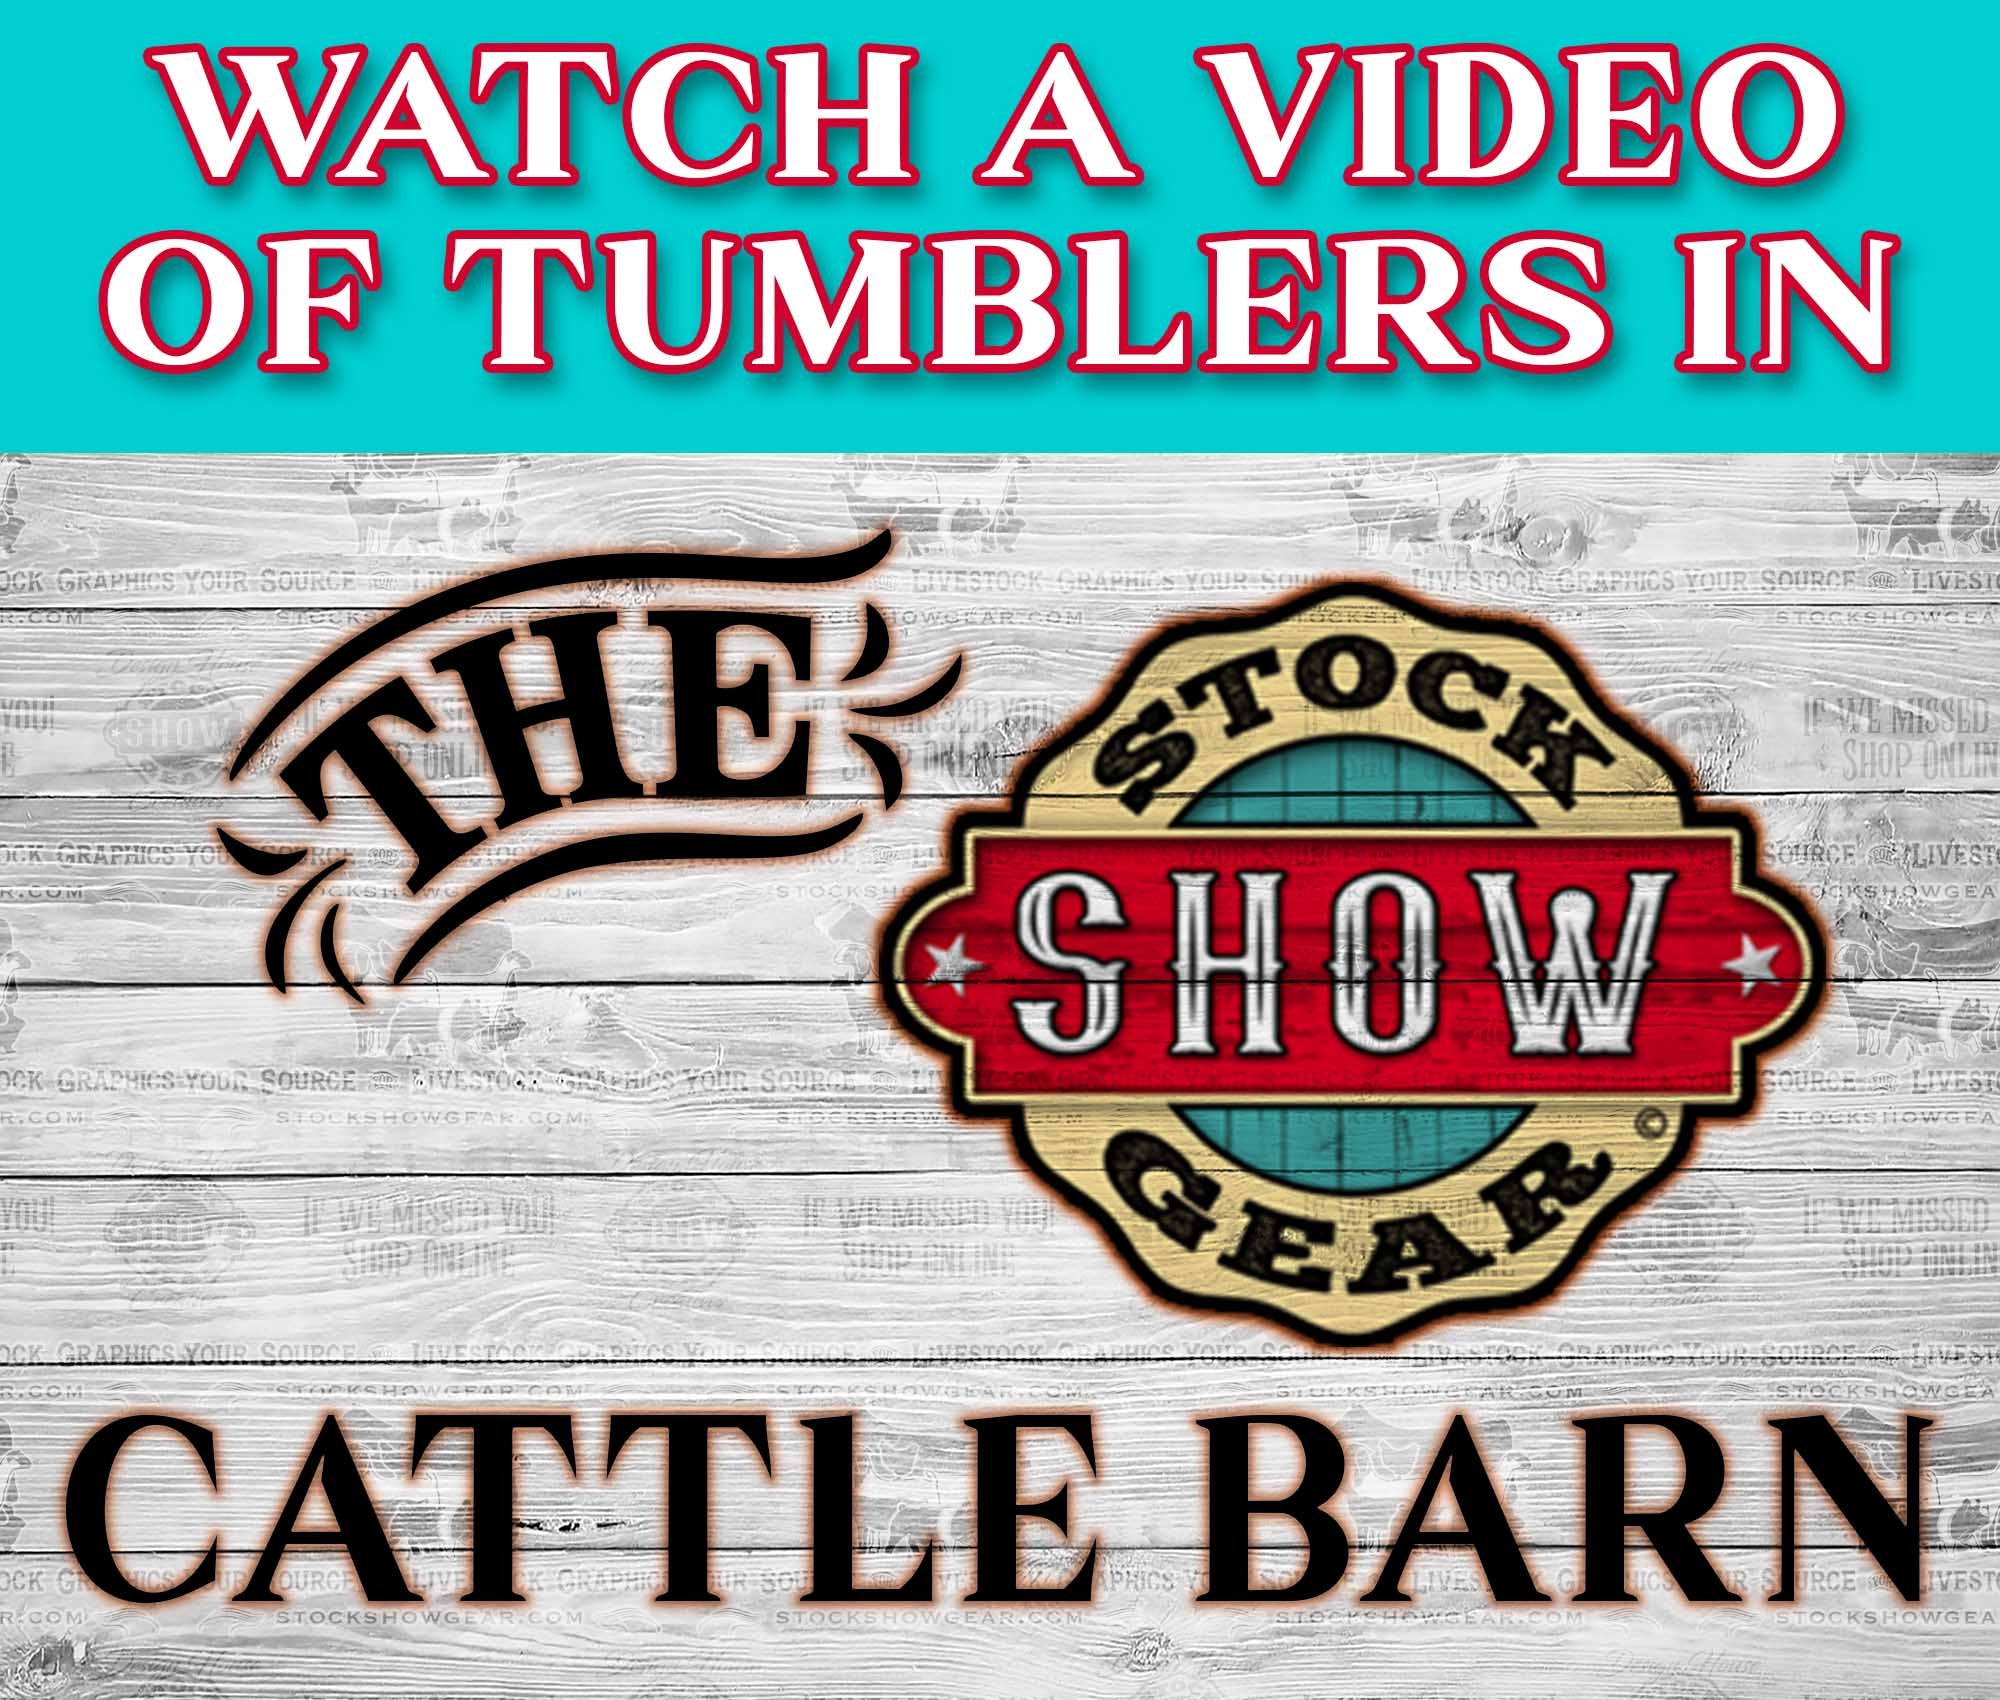 Video-Cattle Barn Tumblers - Watch Now!